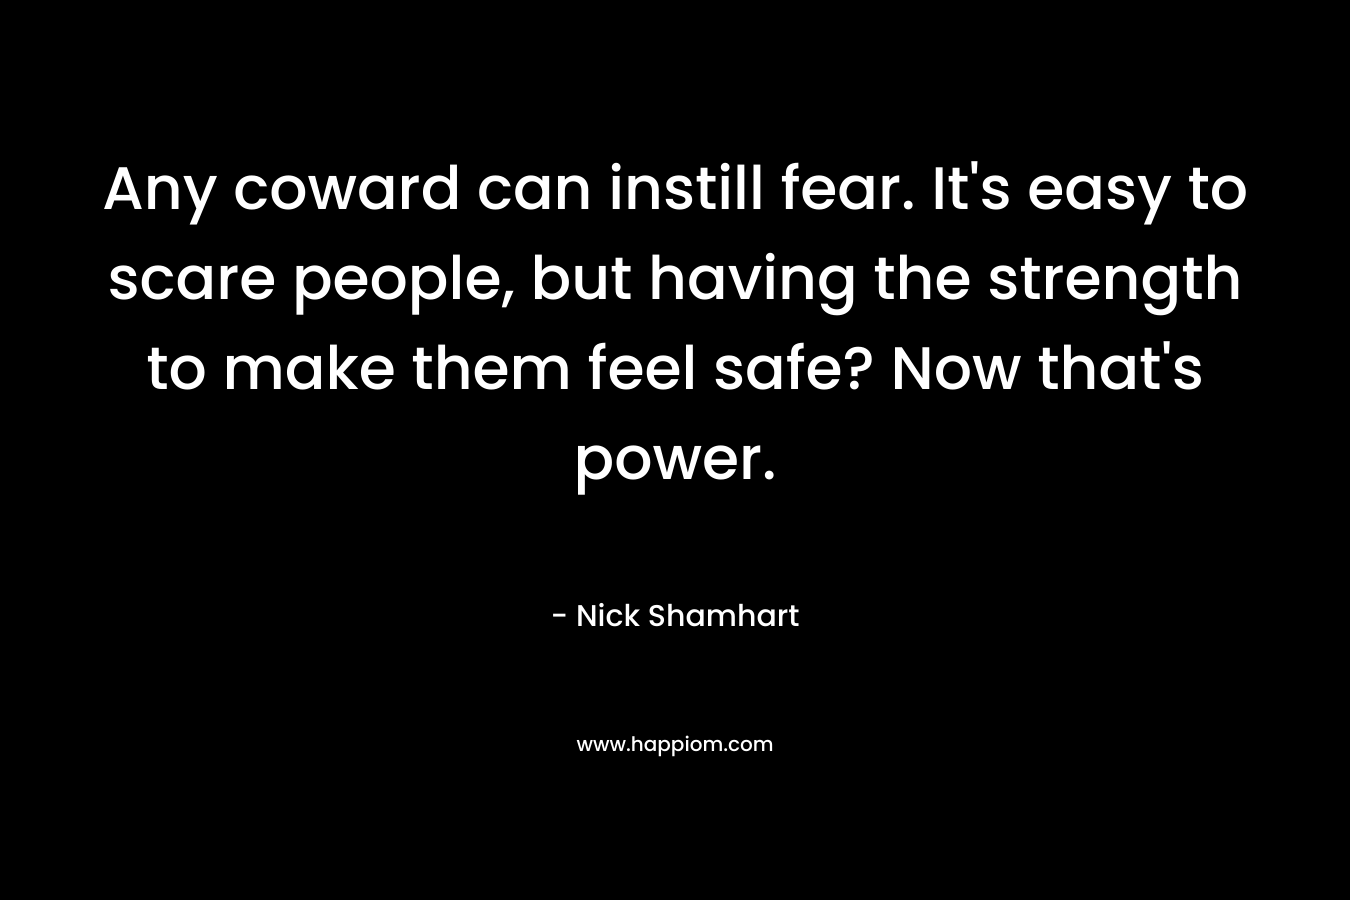 Any coward can instill fear. It’s easy to scare people, but having the strength to make them feel safe? Now that’s power. – Nick Shamhart